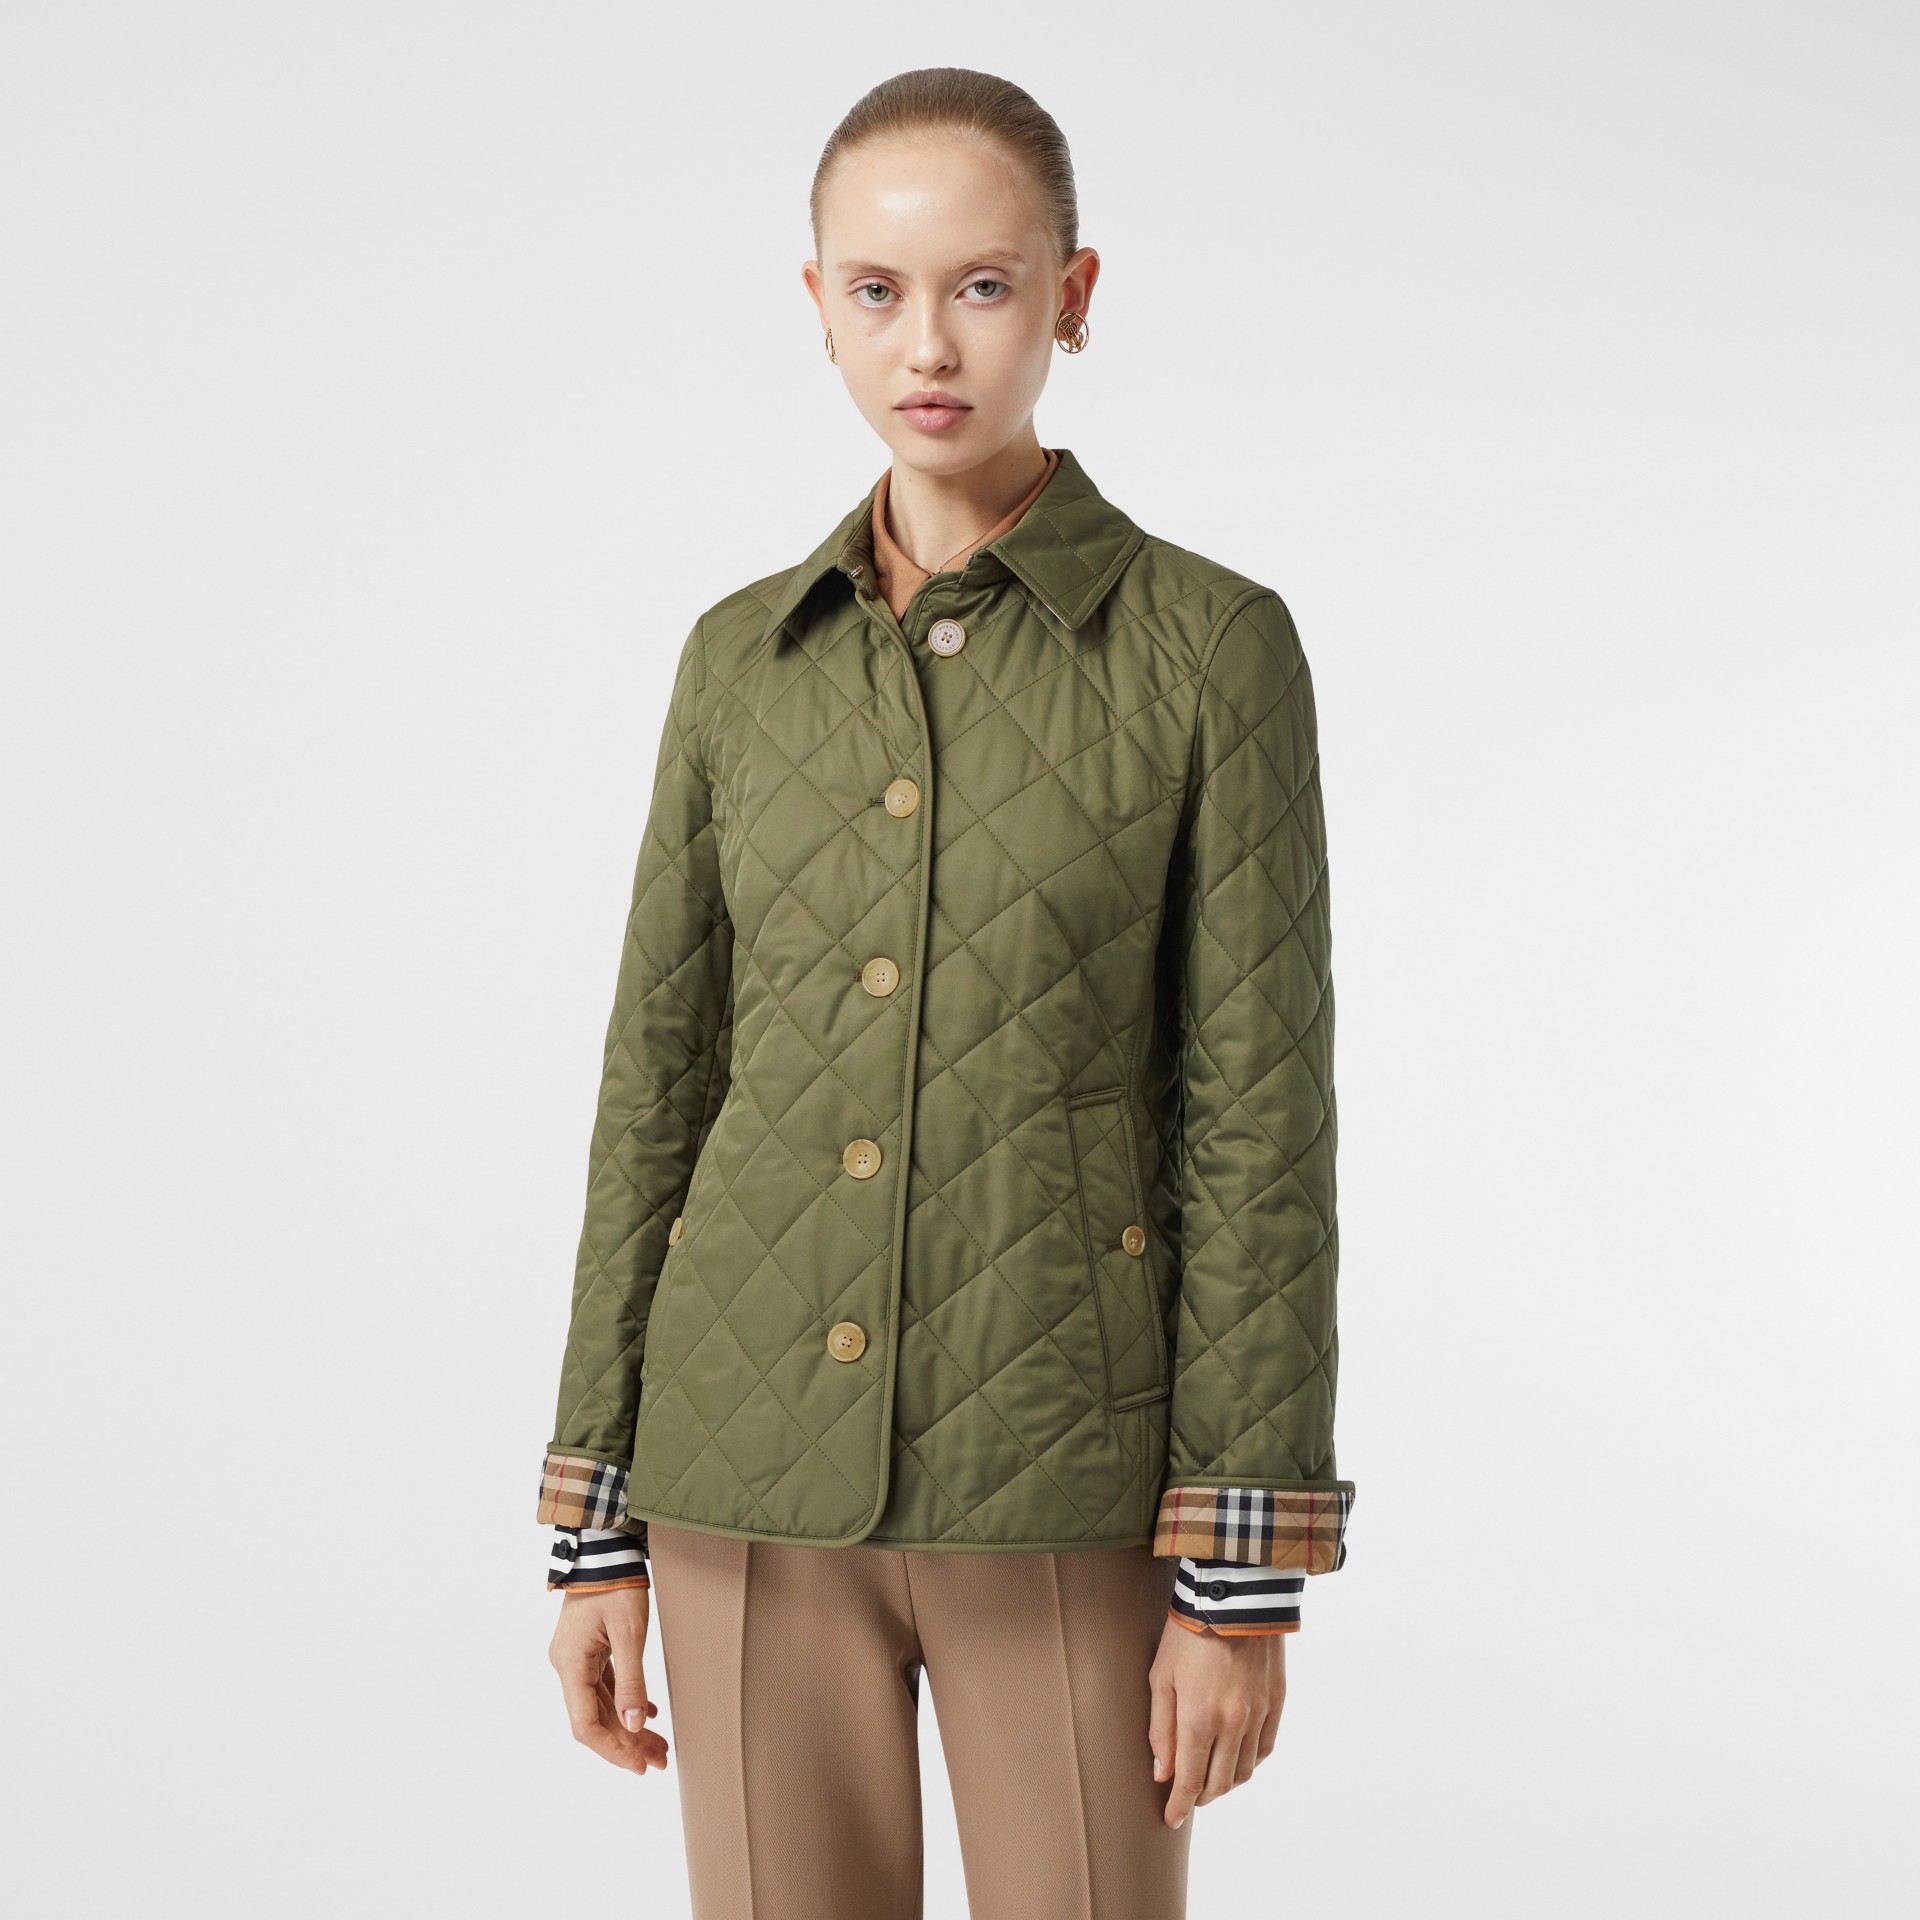 Diamond Quilted Jacket in Olive Green - Women | Burberry United States